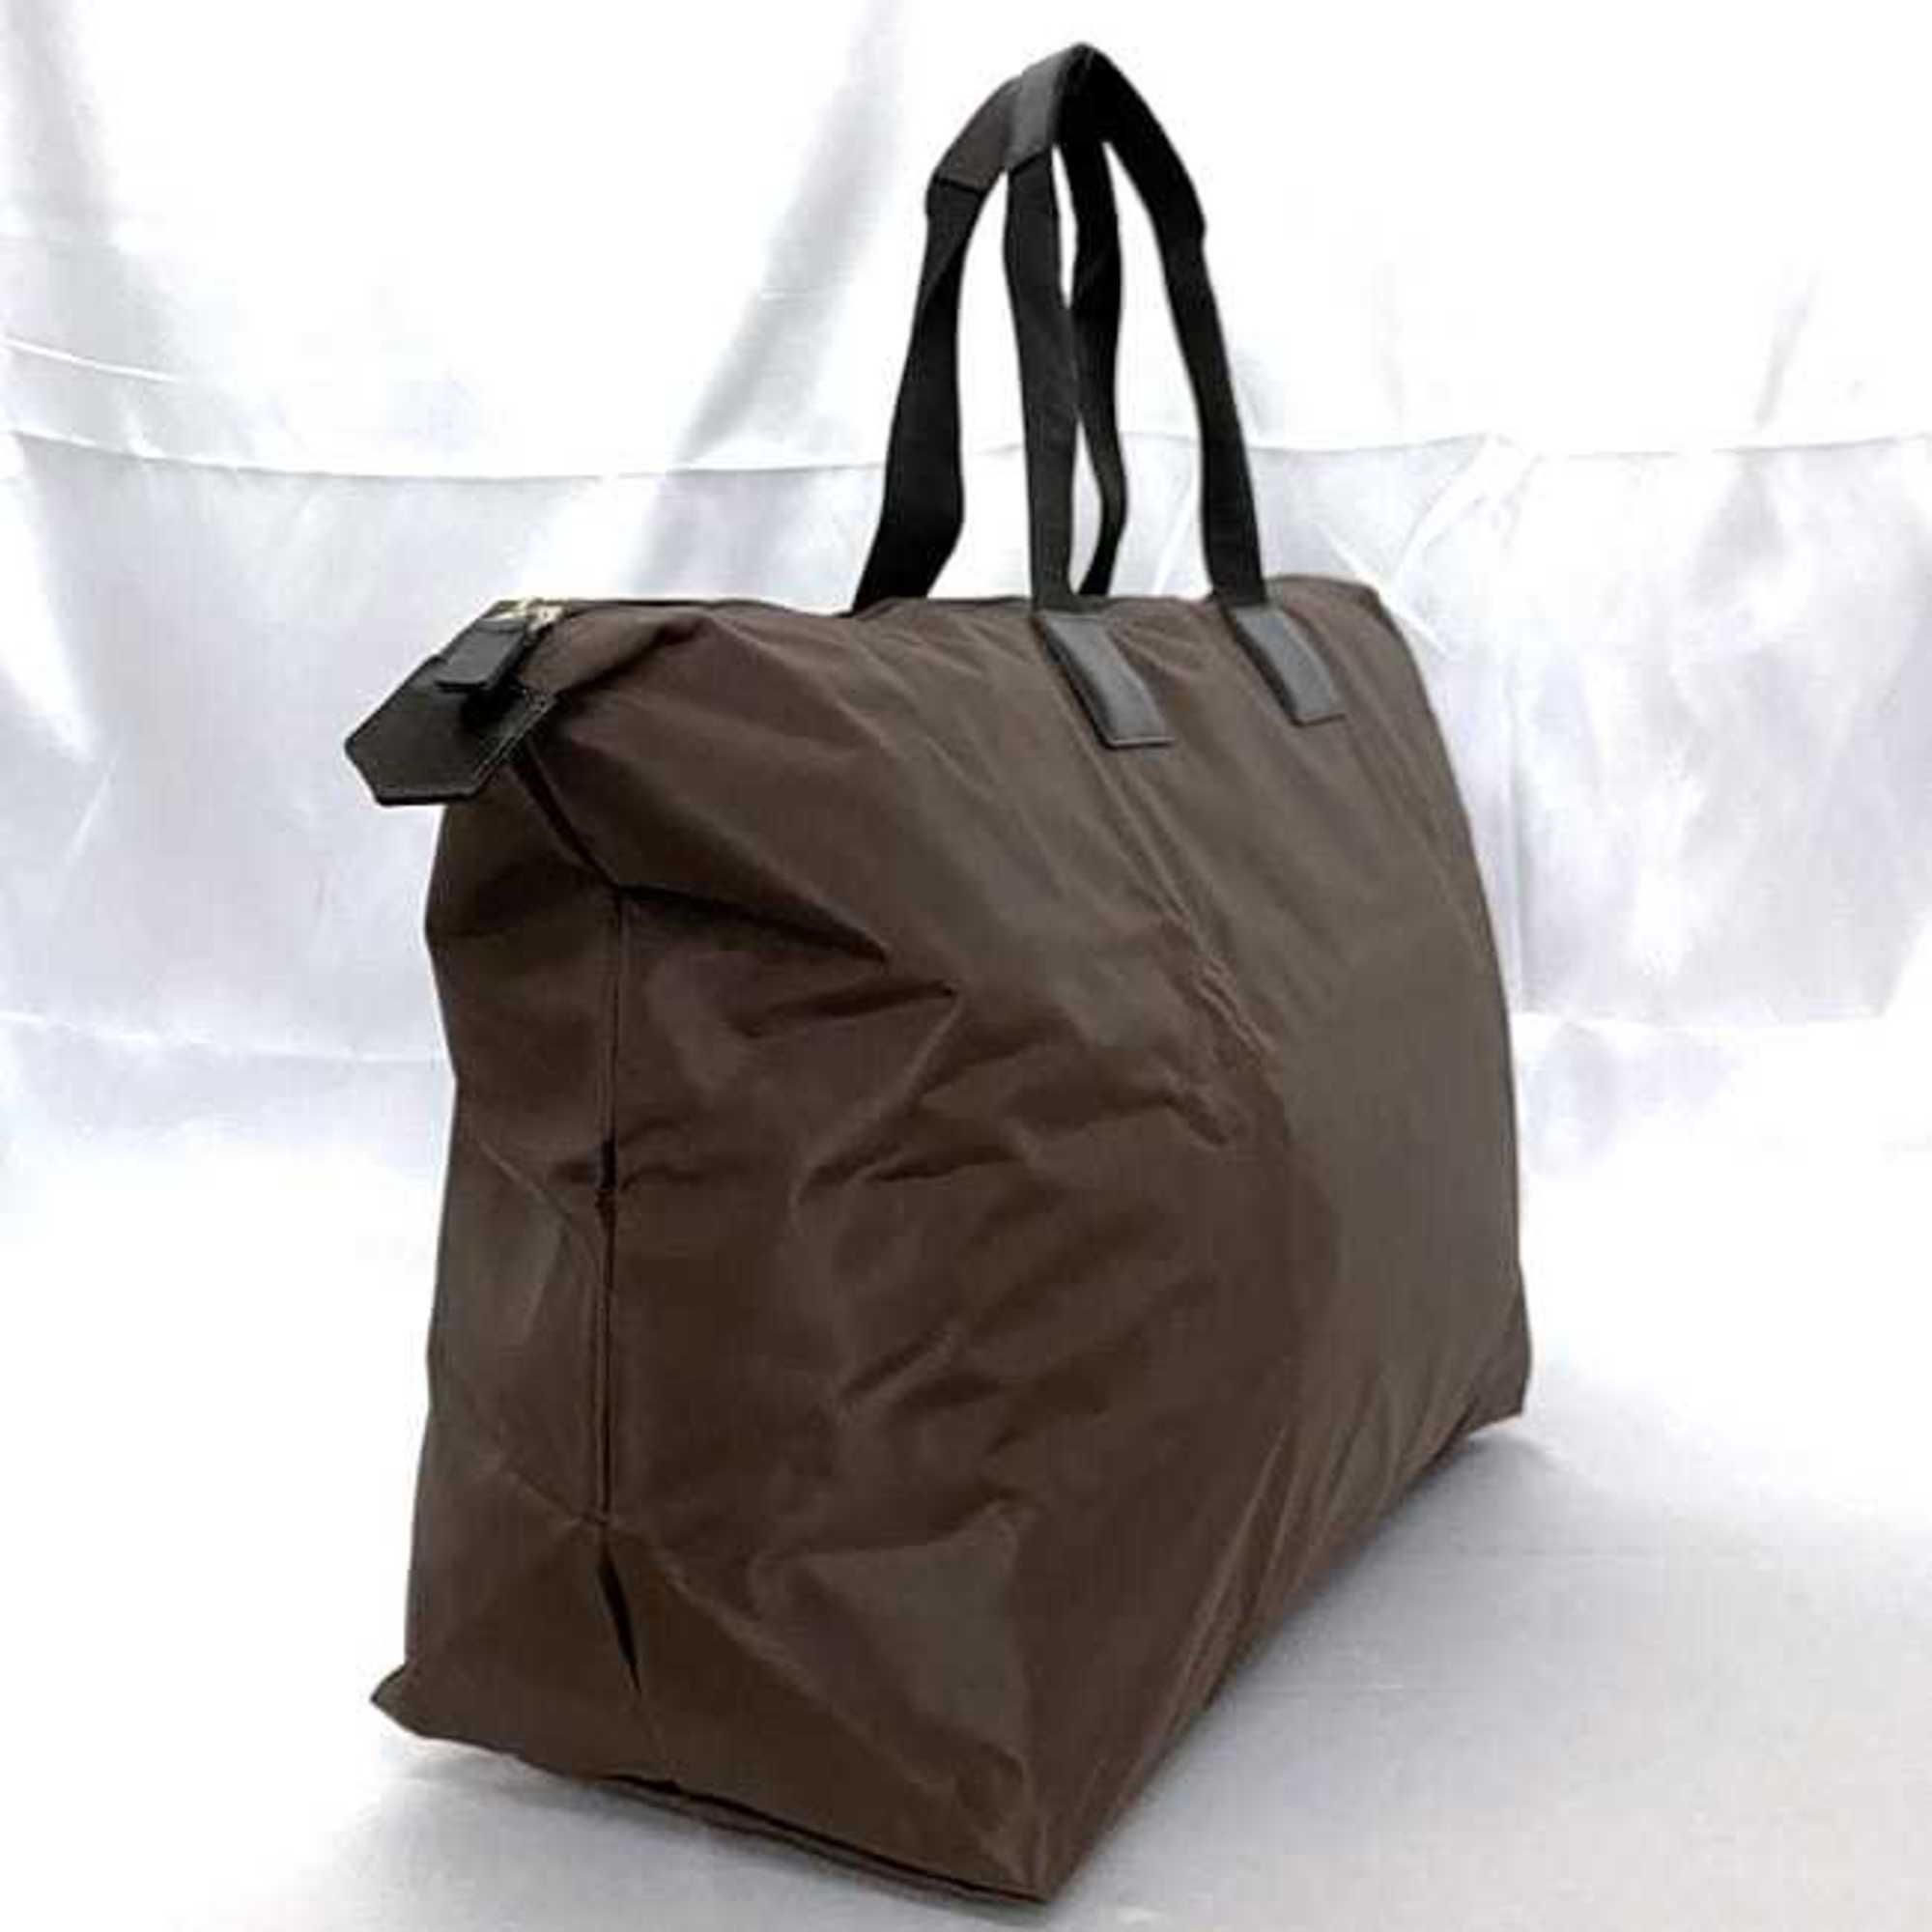 Dunhill Tote Bag Brown Sidecar LU1010B ec-20094 Nylon Leather dunhill Eco Foldable Second Men's Women's